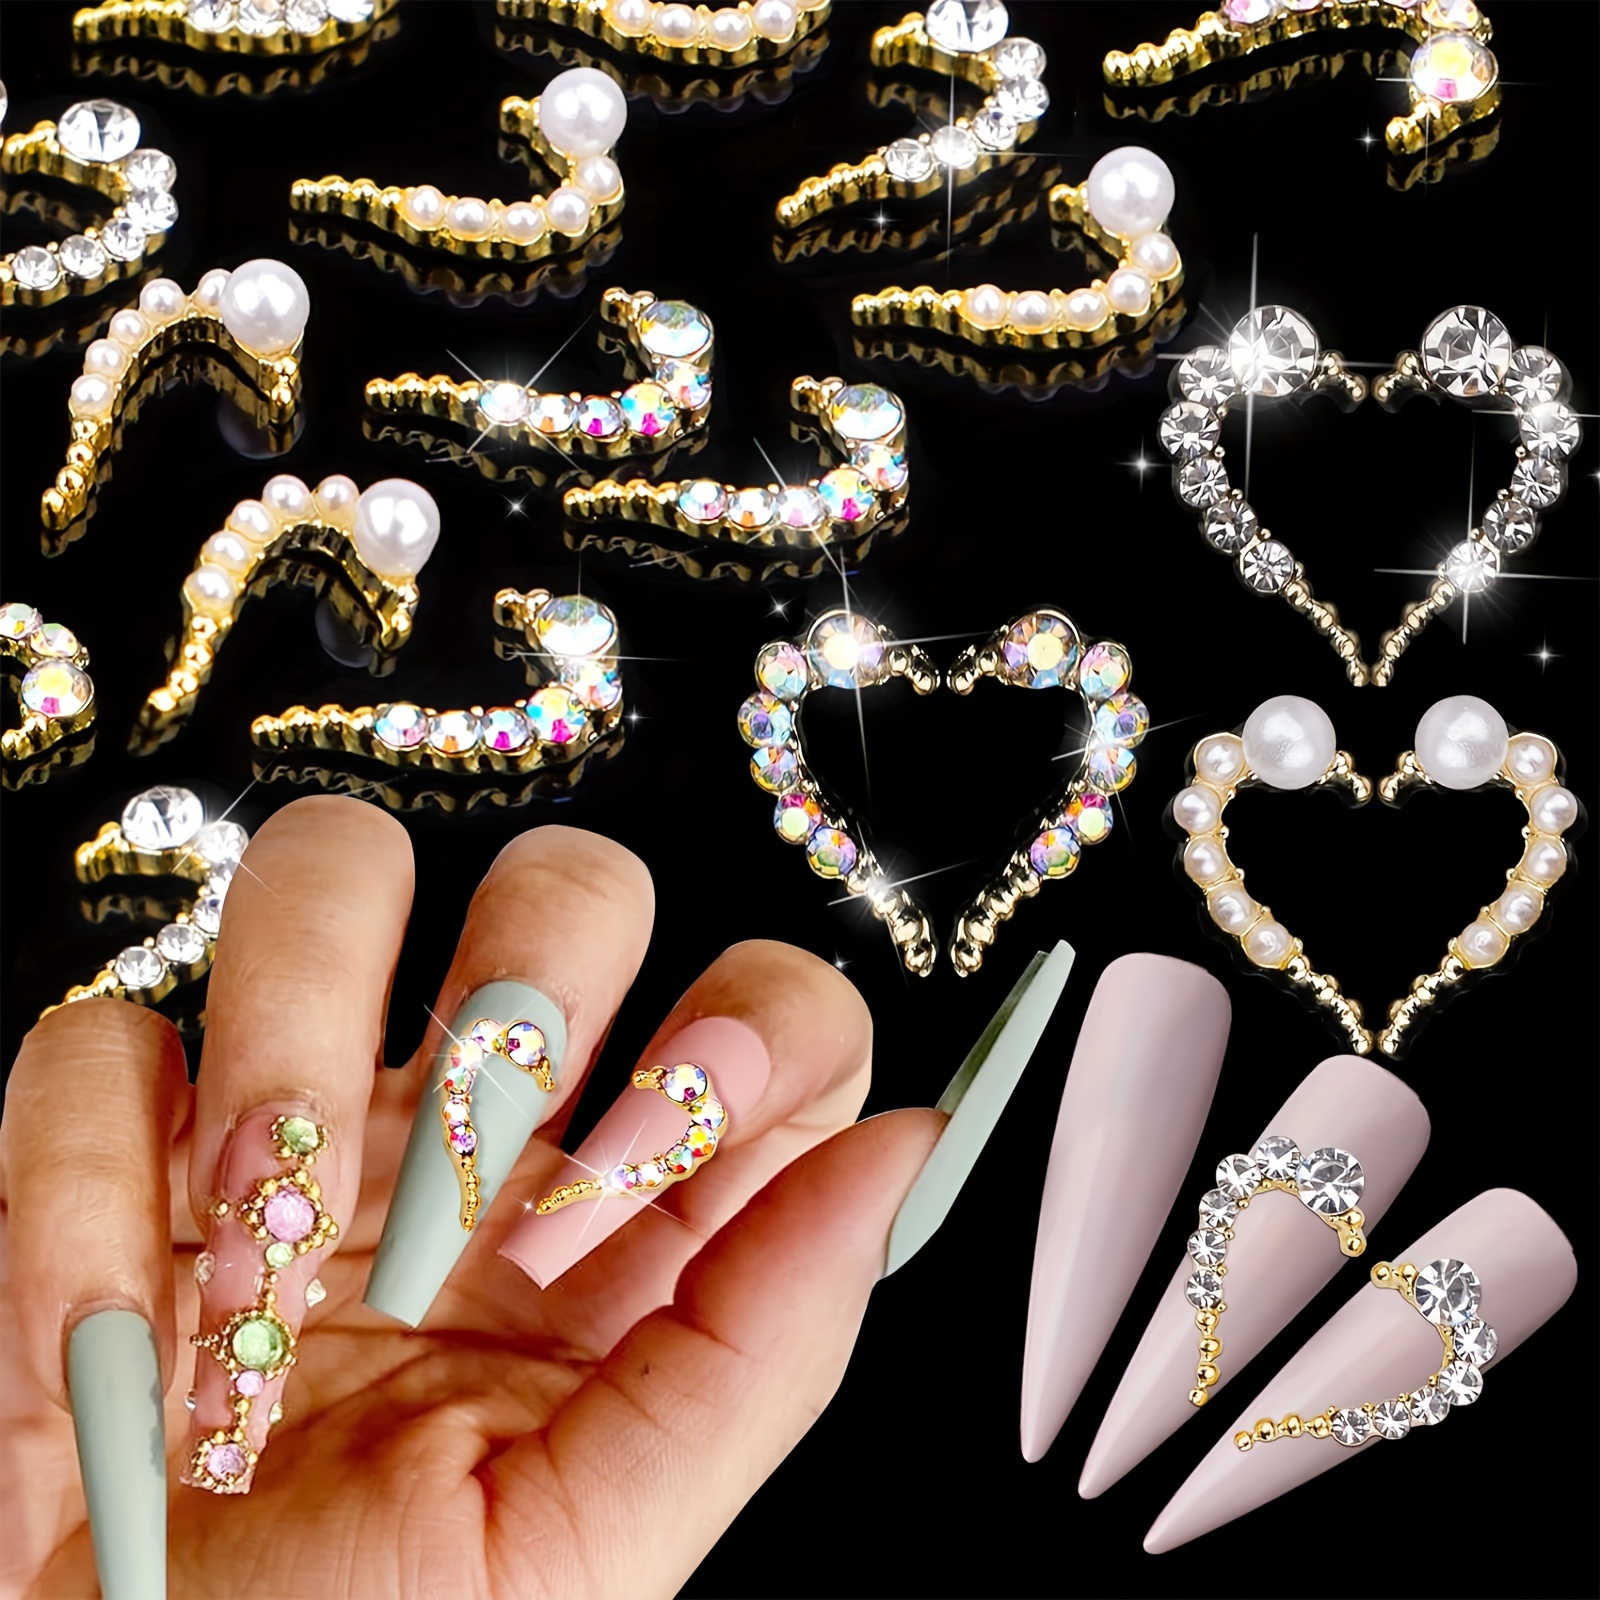 

30pcs Heart Shape Nail Charms With Rhinestones/pearls, Valentine's Day Nail Art Accessories Nail Art Supplies For Women And Girls Nail Jewelry